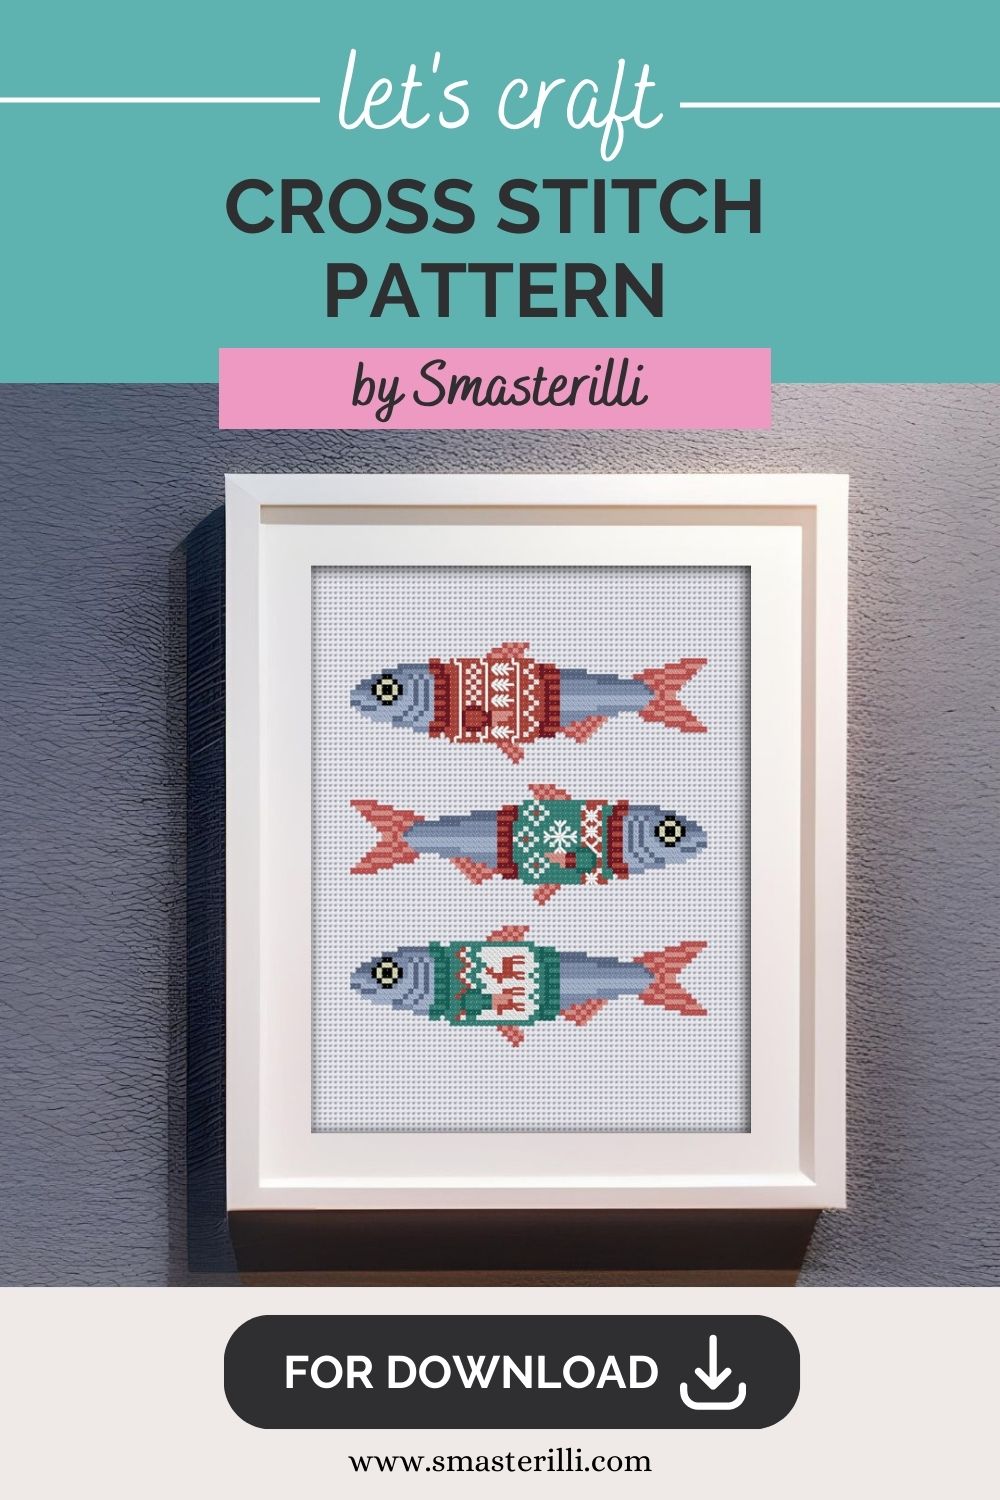 Fishes in Christmas sweaters cross stitch pattern PDF, funny christmas animals embroidery ornament. Digital cross stitch pattern for instant download. easy cross stitch for beginners. Christmas handmade crafts #smasterilli #crossstitch #crossstitchpattern #wintercrossstitch #christmascrossstitch #easycrossstitch #tinycrossstitch #fishcrossstitch